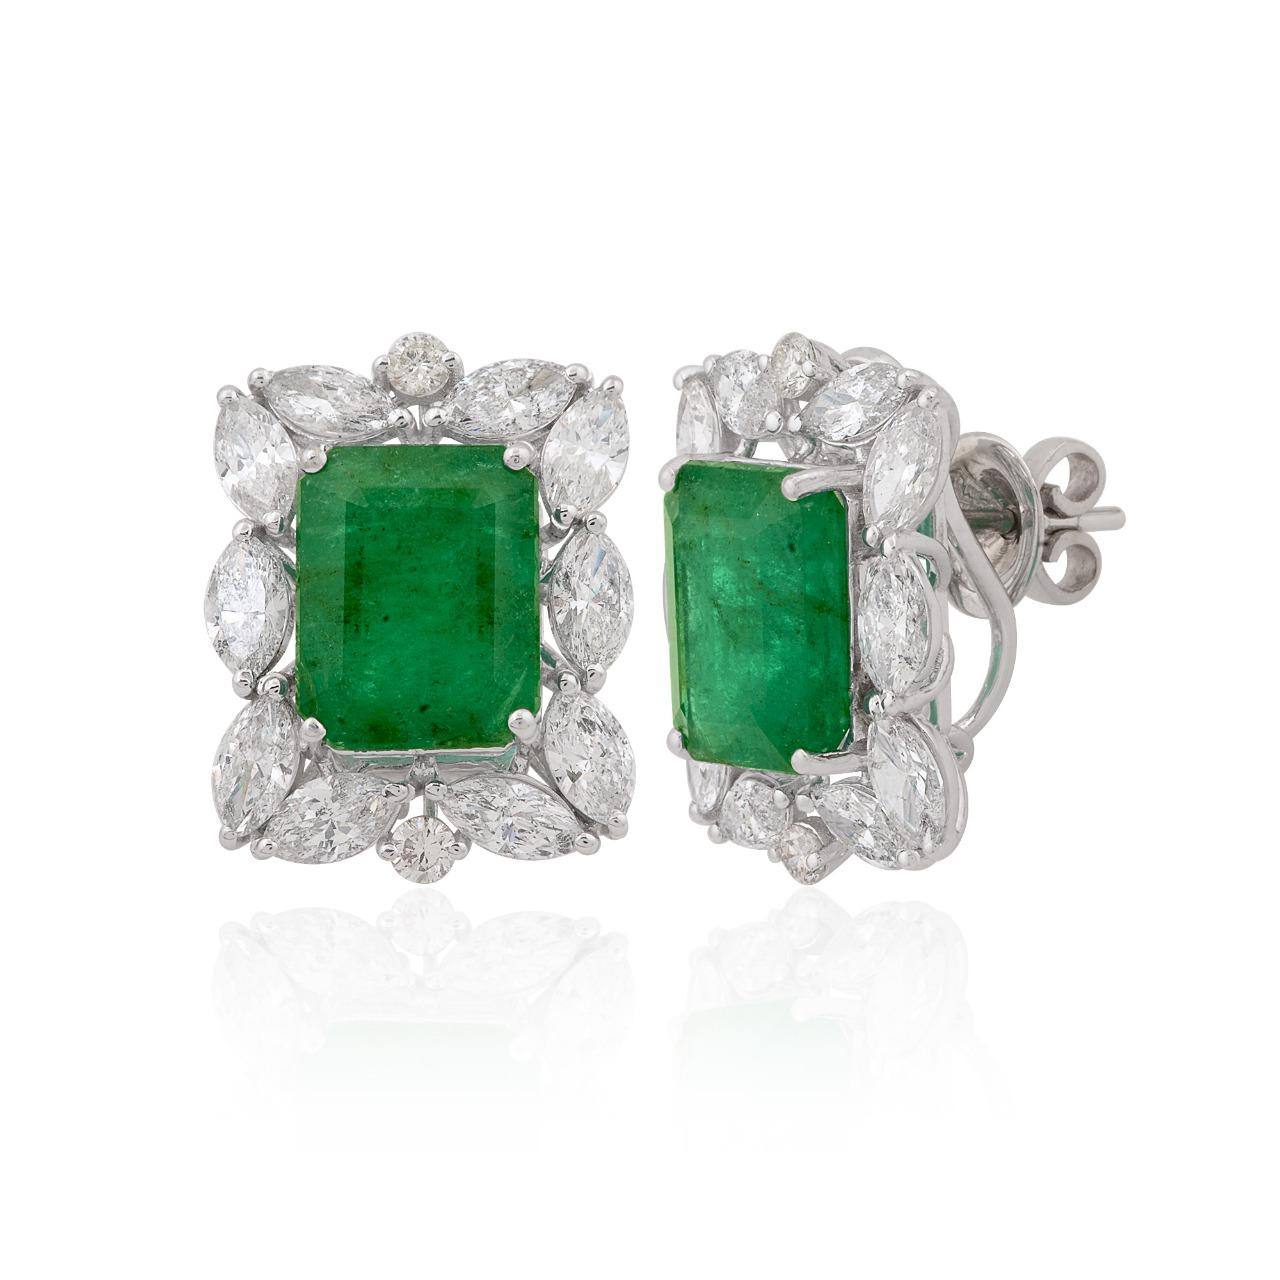 Cast in 14 karat gold, these stunning stud earrings are hand set with 10.06 carats emerald and 3.85 carats of glimmering diamonds. 

FOLLOW MEGHNA JEWELS storefront to view the latest collection & exclusive pieces. Meghna Jewels is proudly rated as